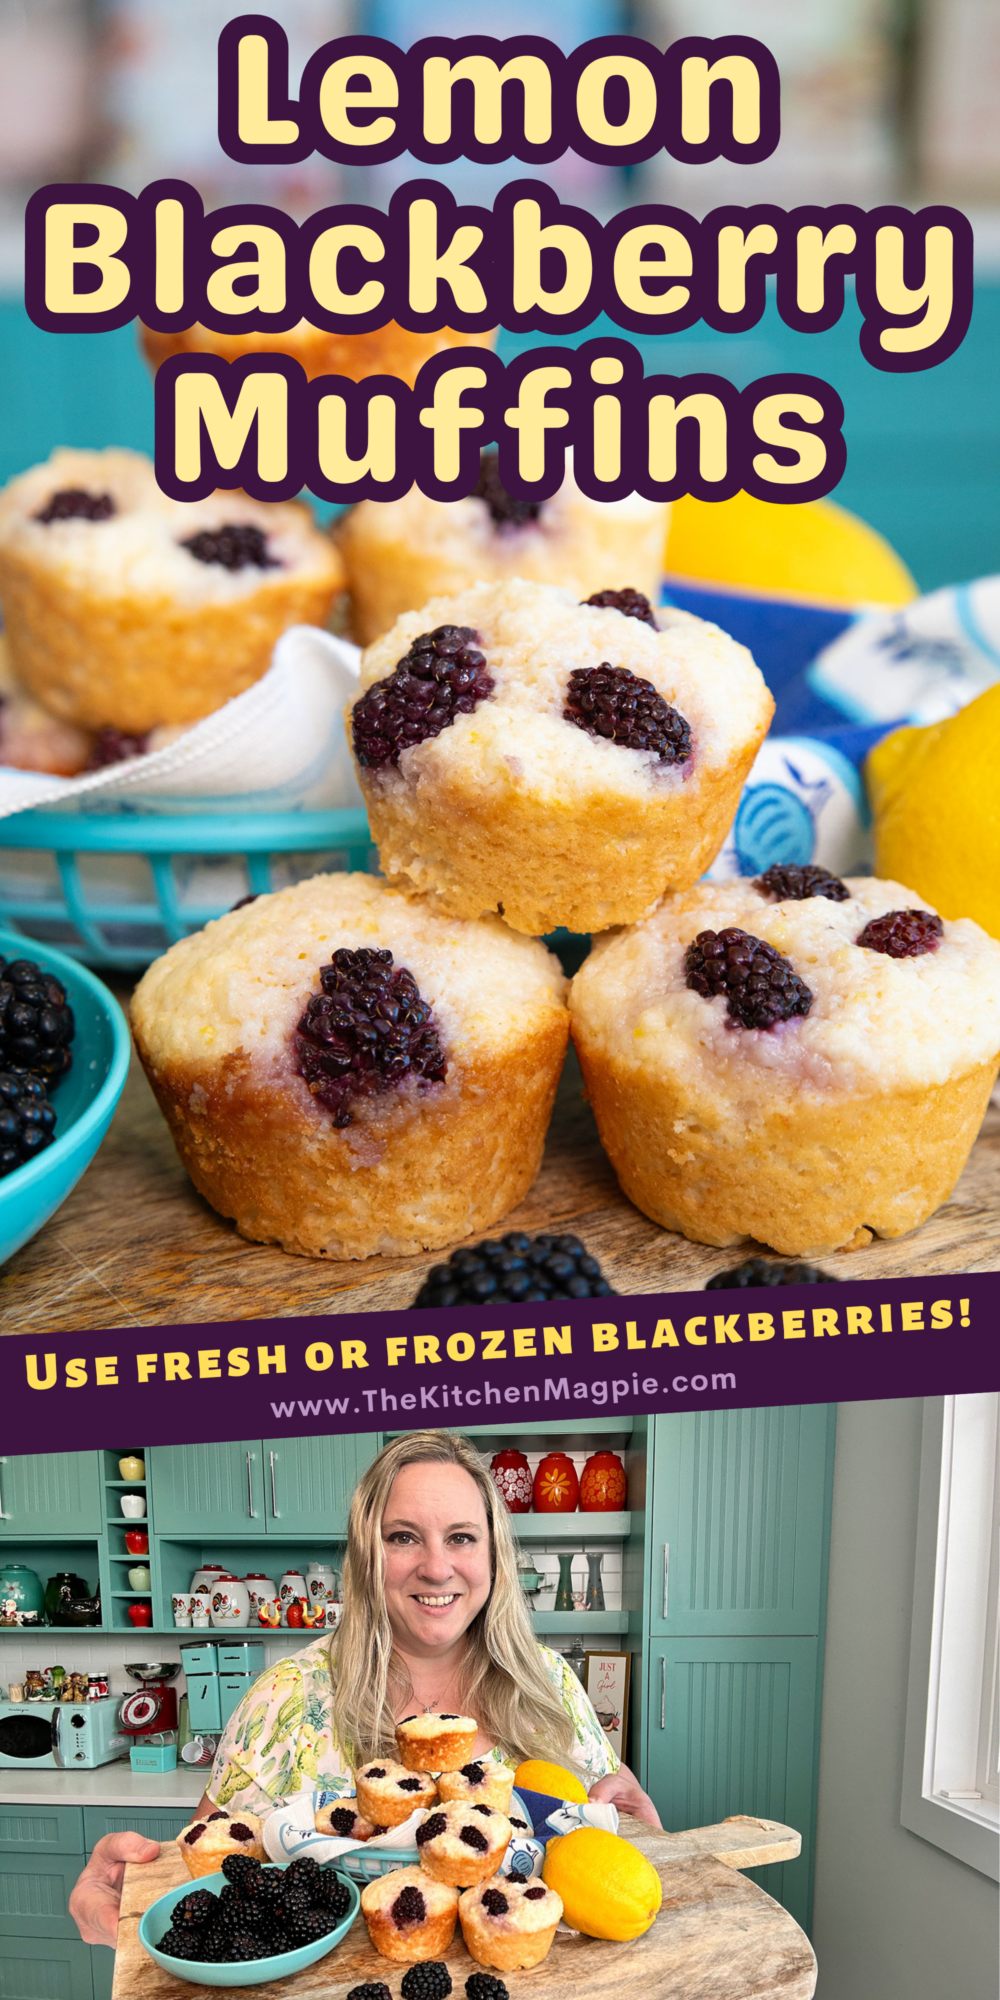 Lemon and blackberries pair up in these lighter muffins to make a decadent, summertime-flavored treat for breakfast or a snack!